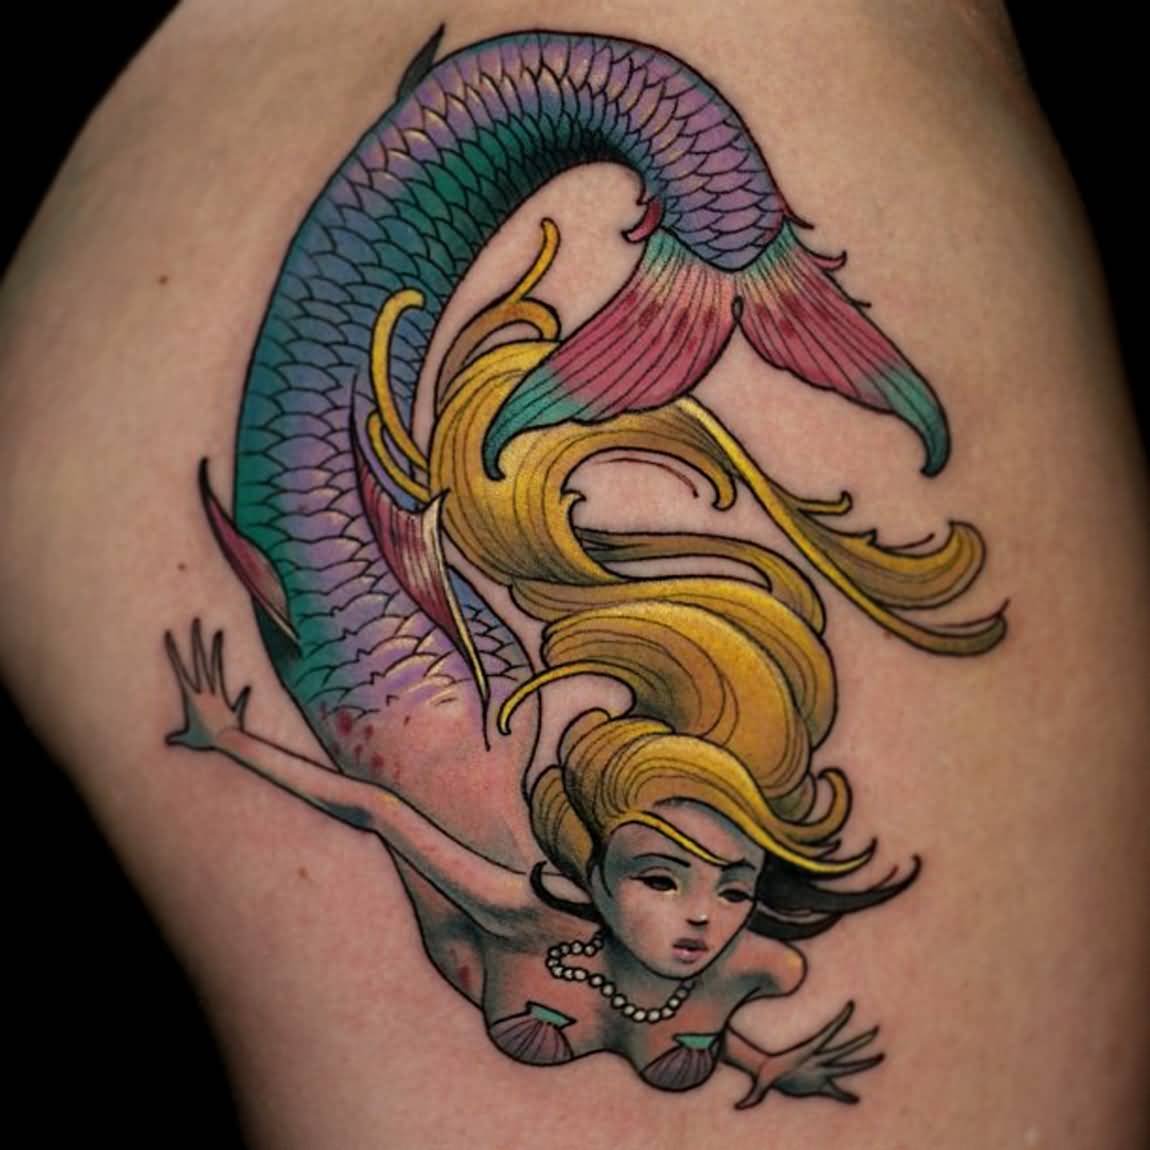 Cool Colorful Mermaid Tattoo Design For Shoulder